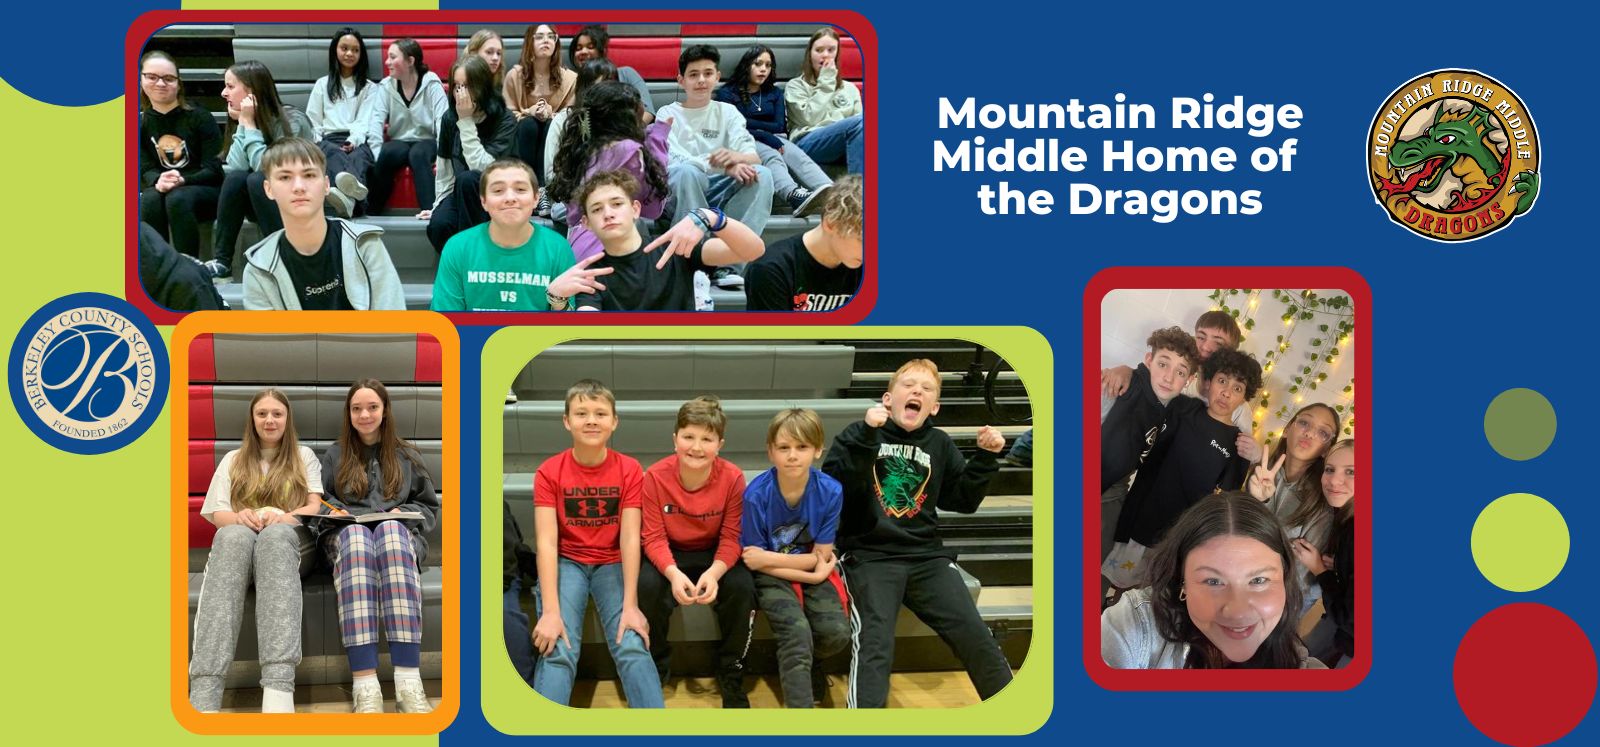 Mountain Ridge Middle Home of the Dragons